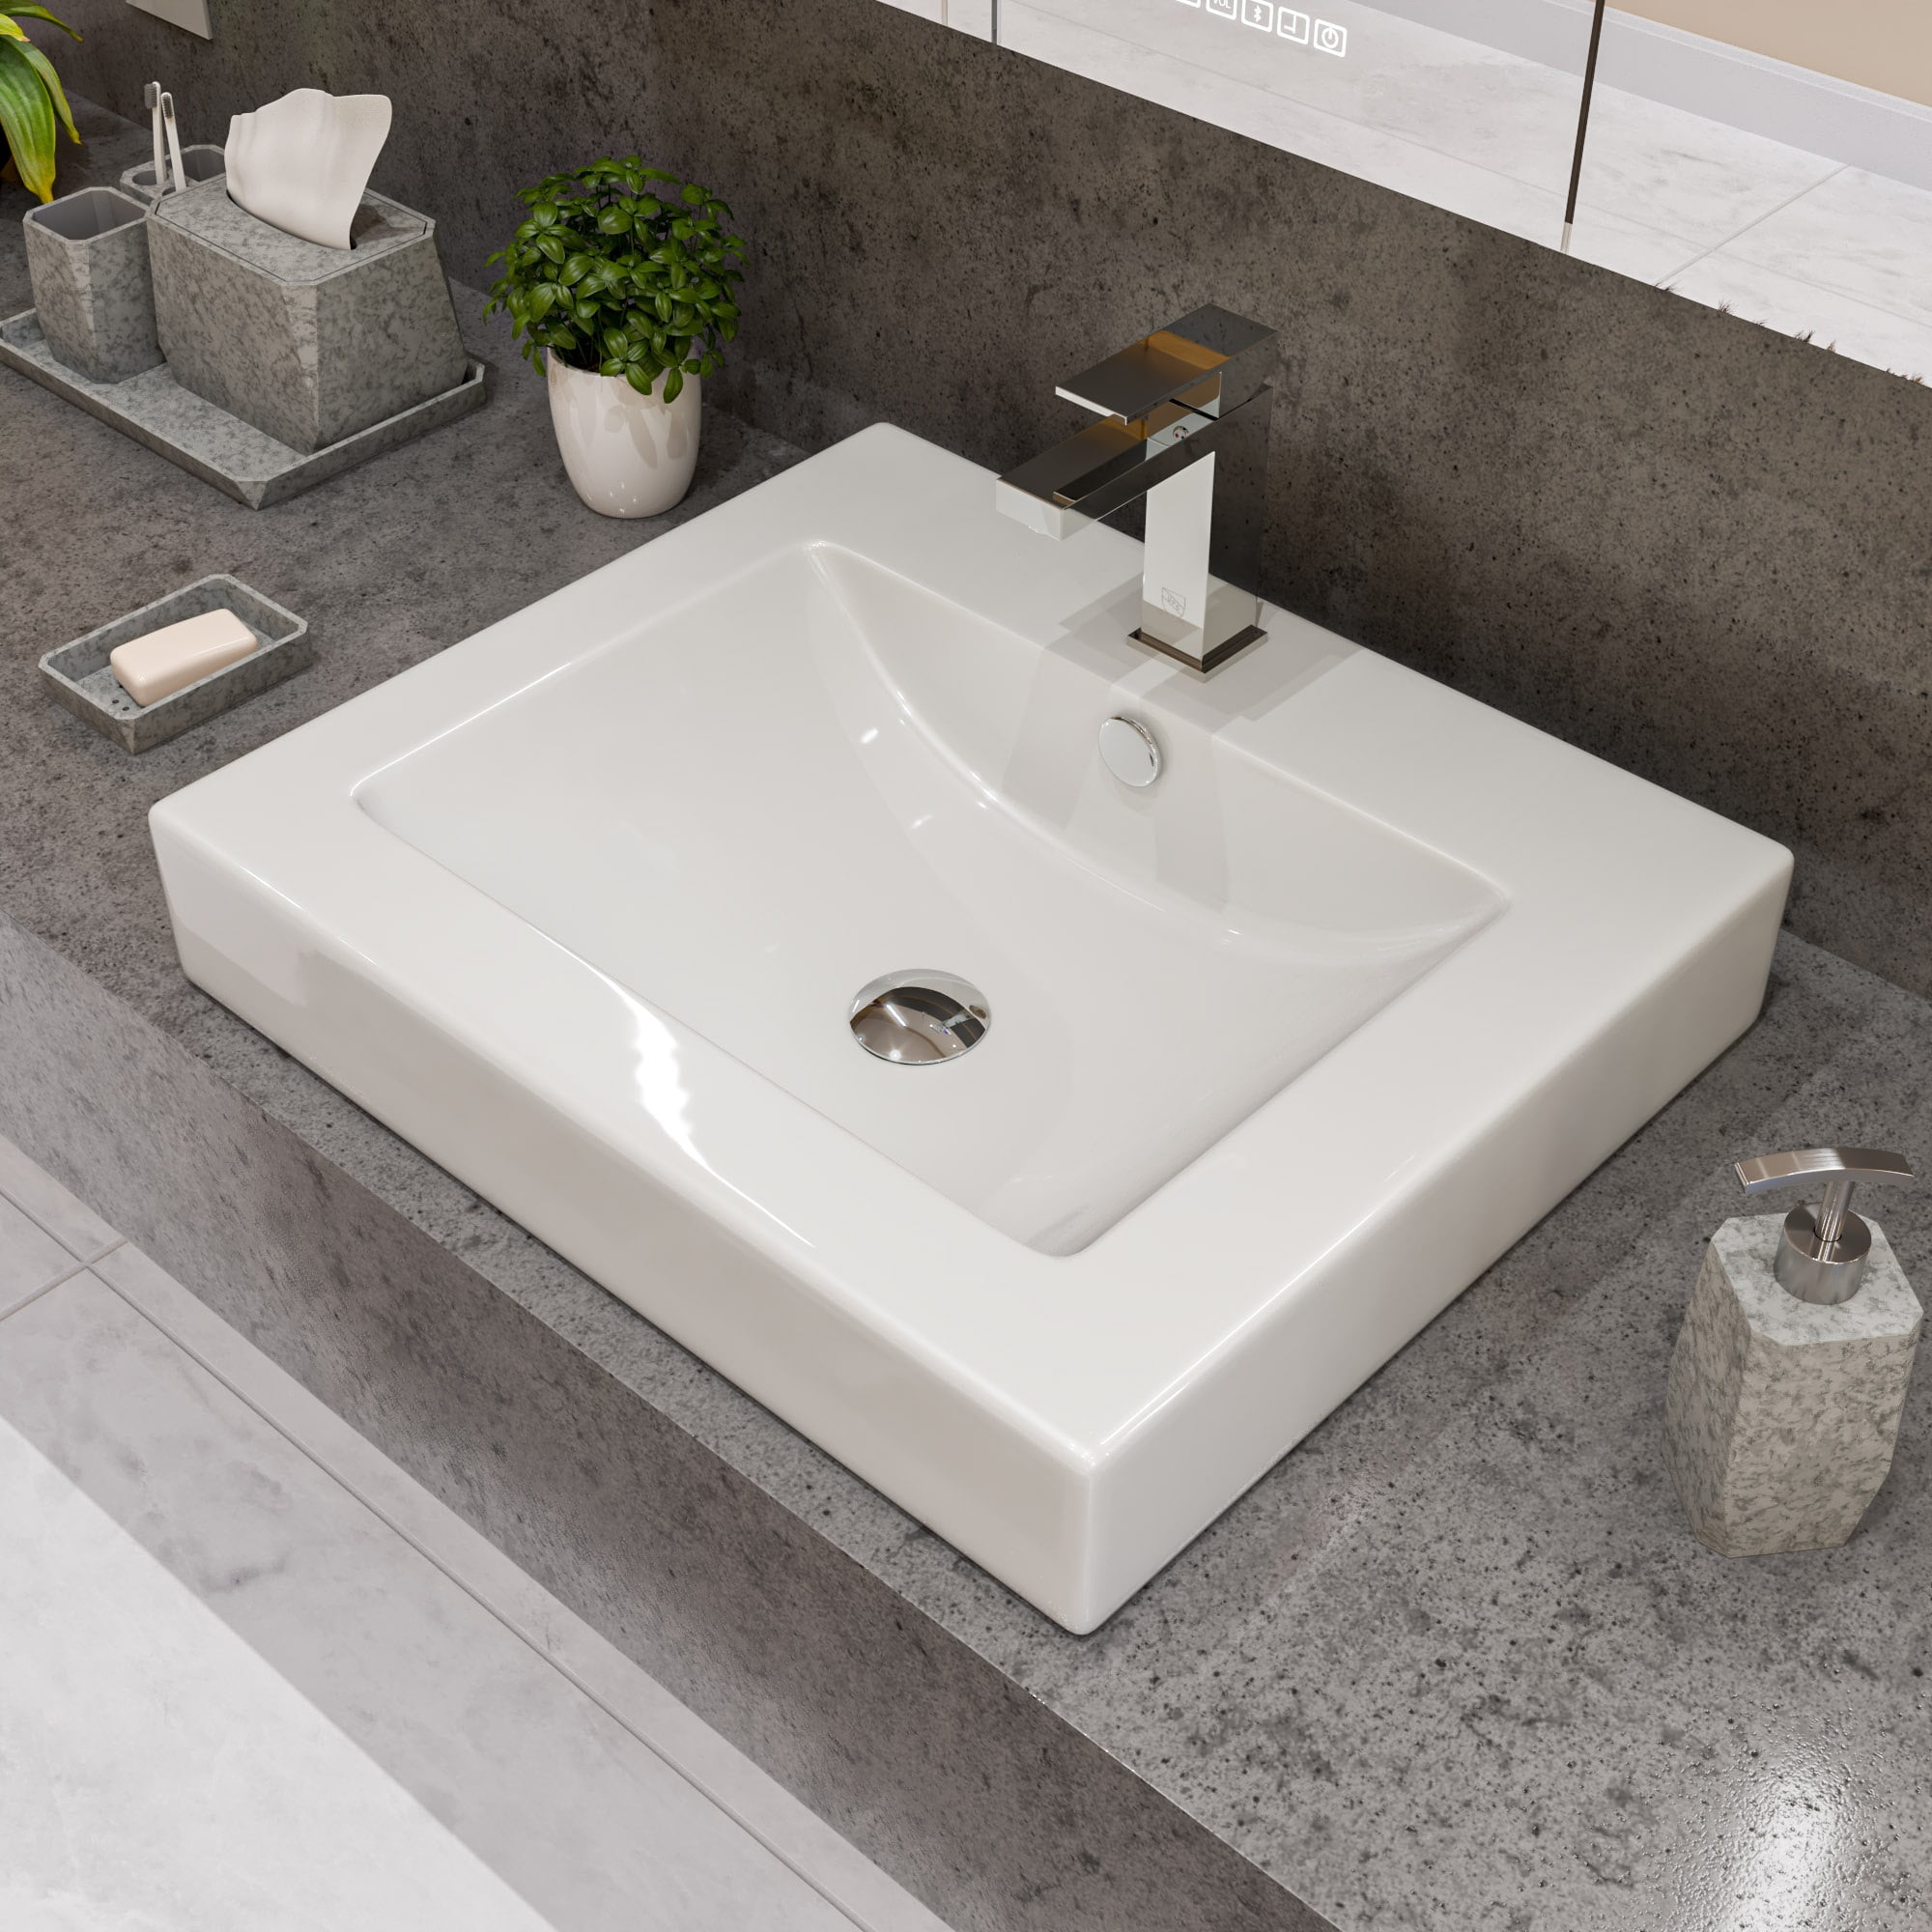 Picture of ALFI Brand ABC701 24 in. Rectangular Semi Recessed Ceramic Sink with Faucet Hole, White